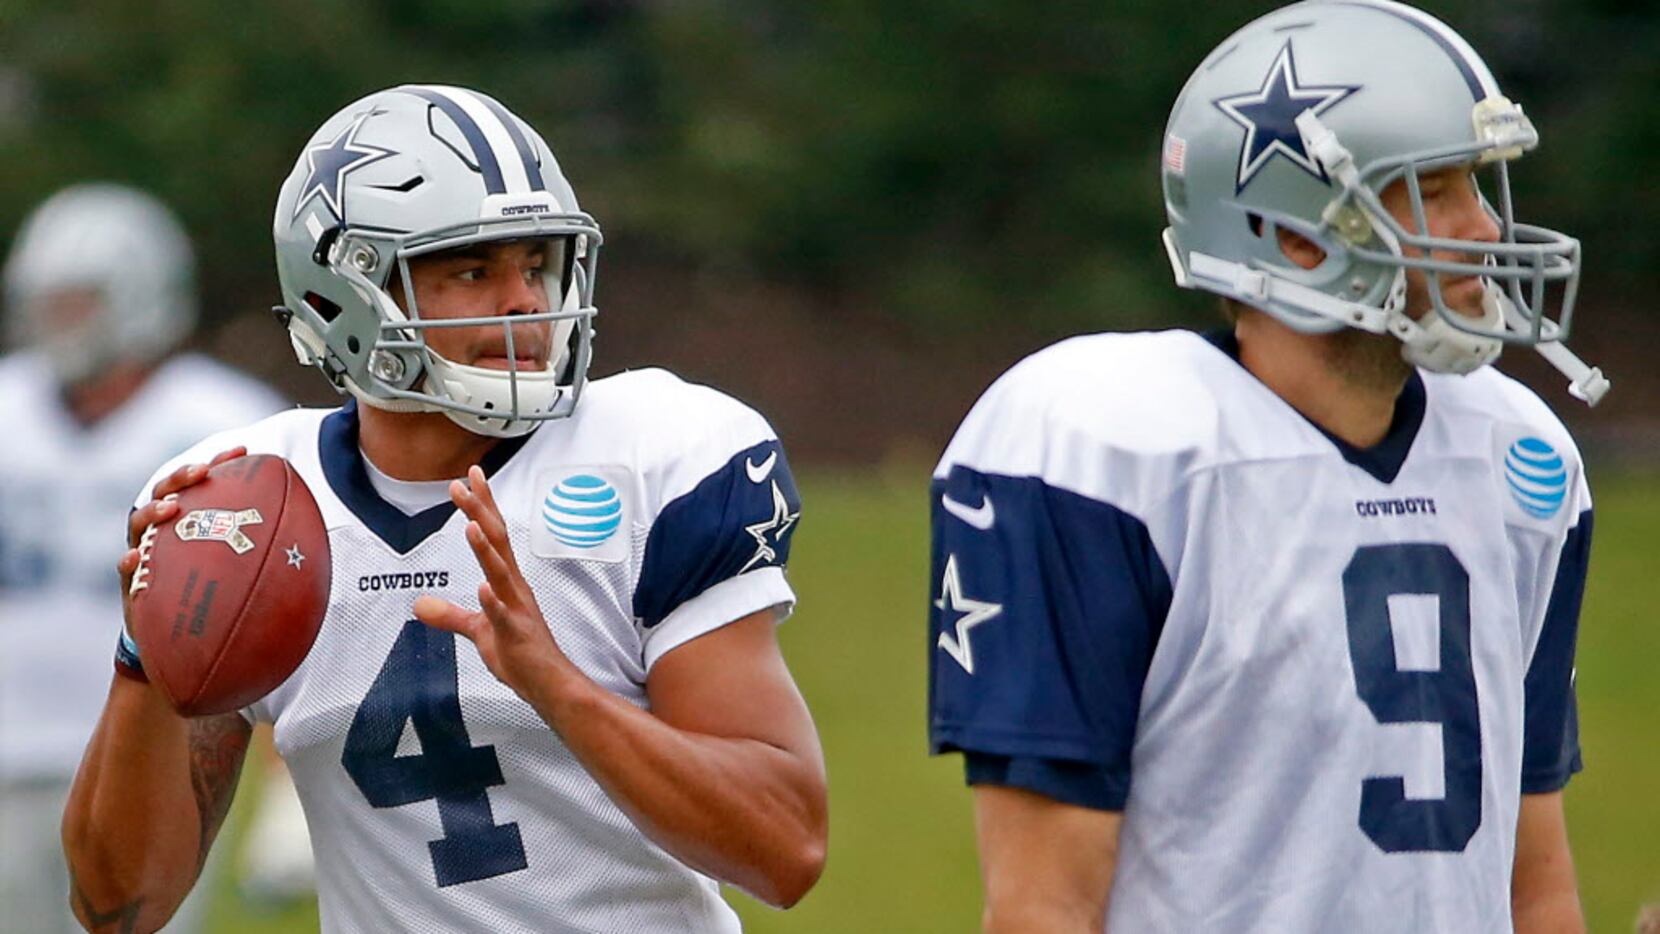 Cowboys Assign Tony Romo's No. 9 to Offensive Player for First